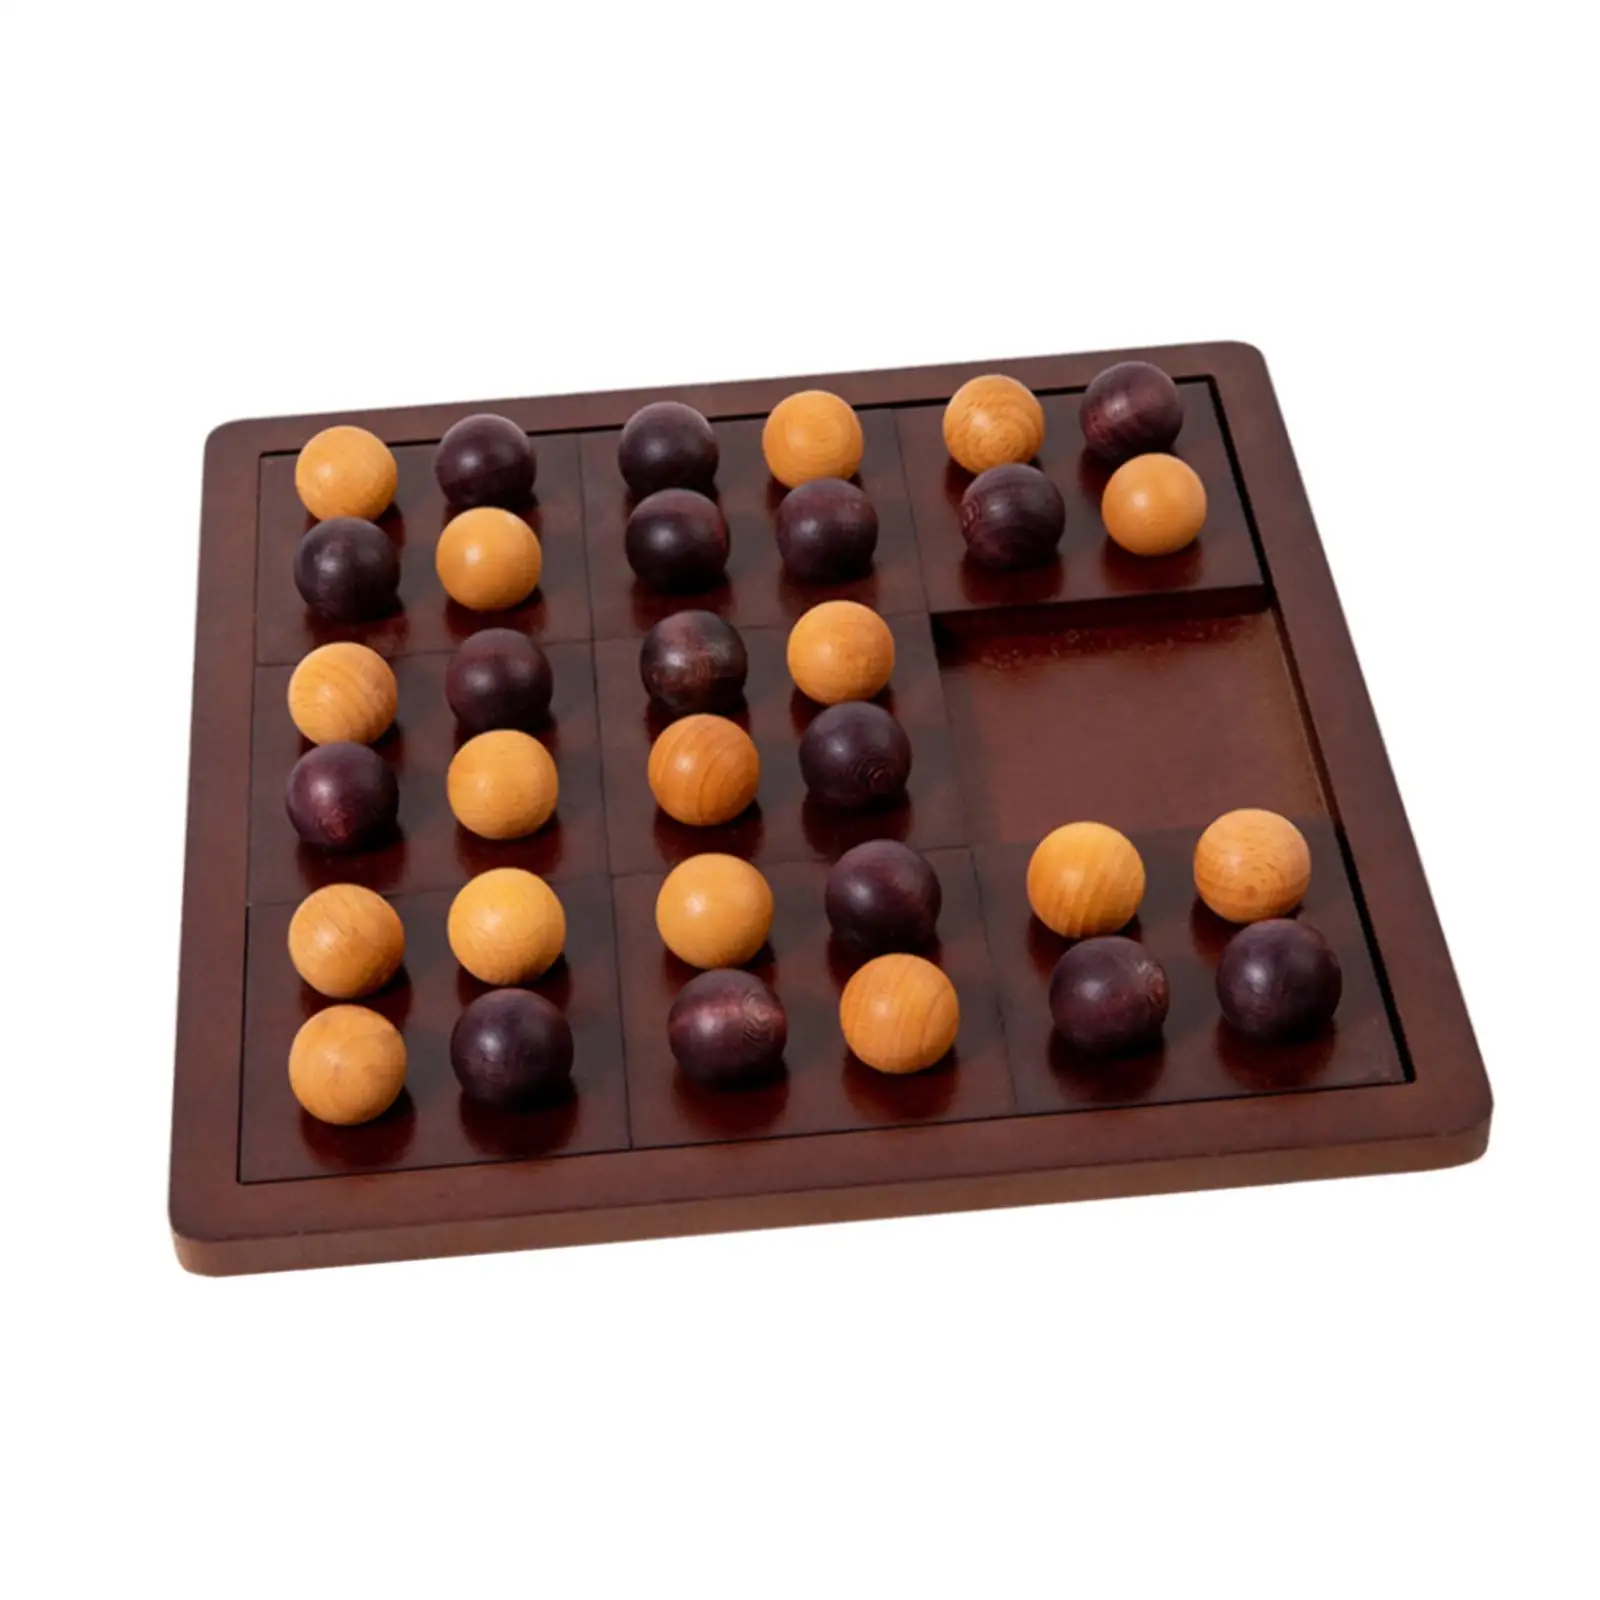 Wood Tic TAC Toe Game Logical Thinking Training Dual Challenge Chess Toy for Children Adults Outdoor Indoor Travel Plane Trips